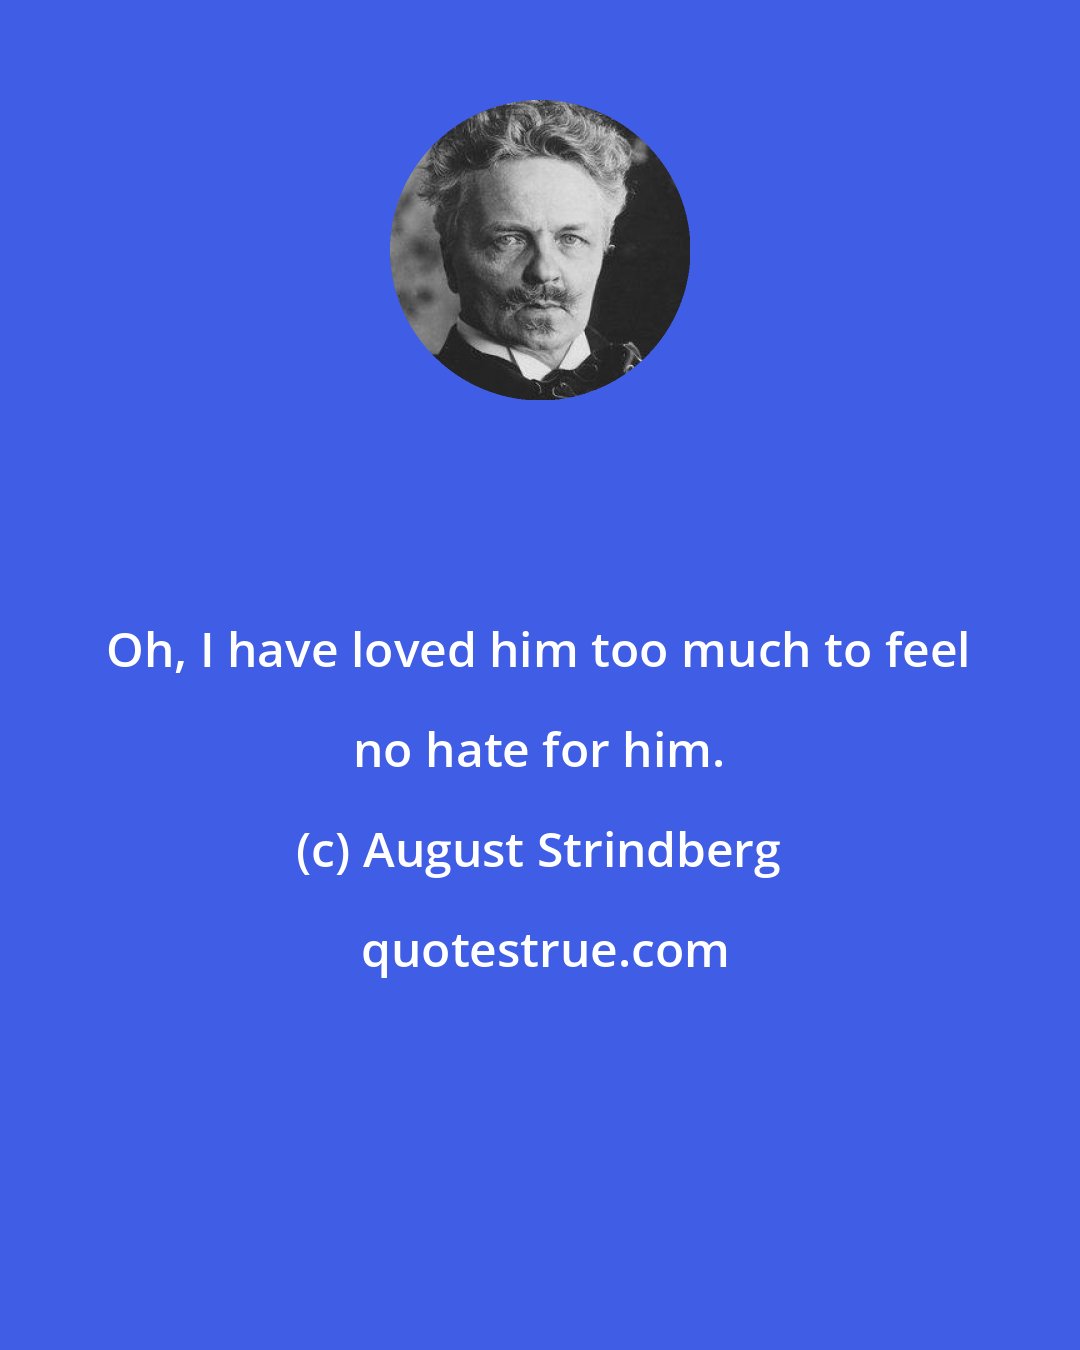 August Strindberg: Oh, I have loved him too much to feel no hate for him.